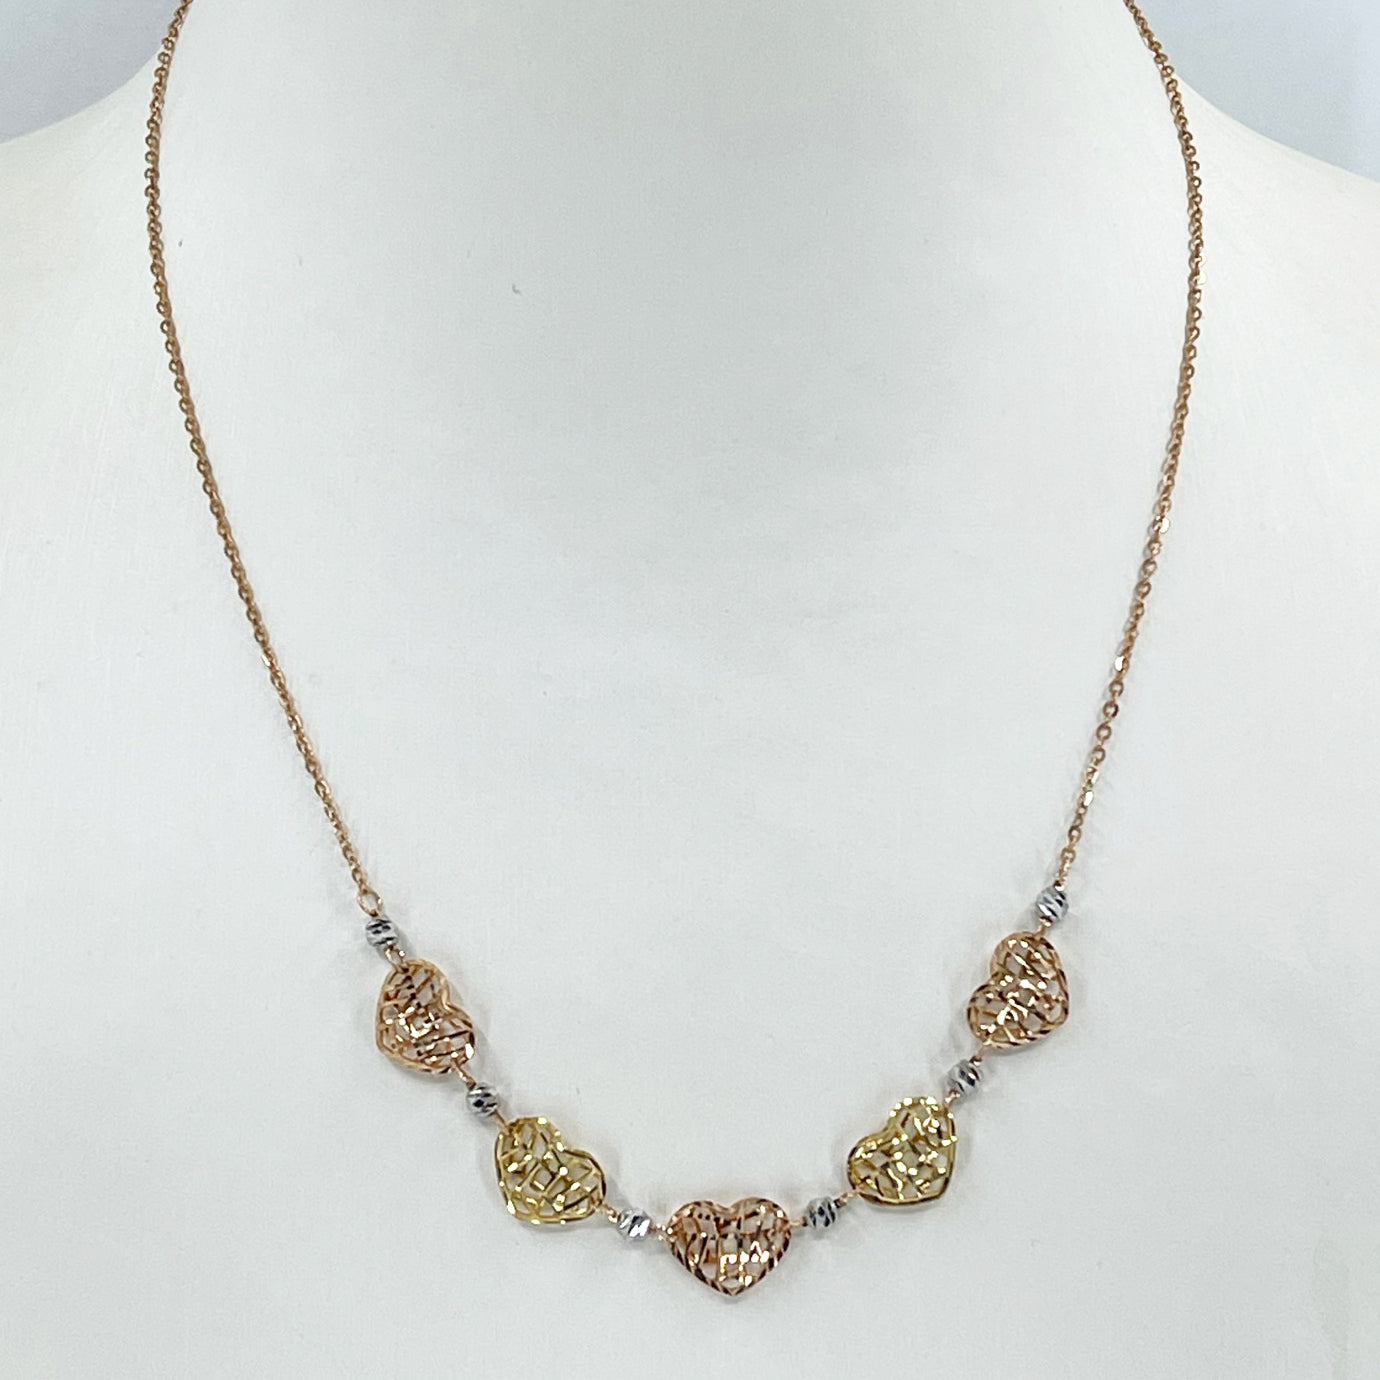 18K Solid Rose Gold Link Chain Necklace with Heart Pendant 16